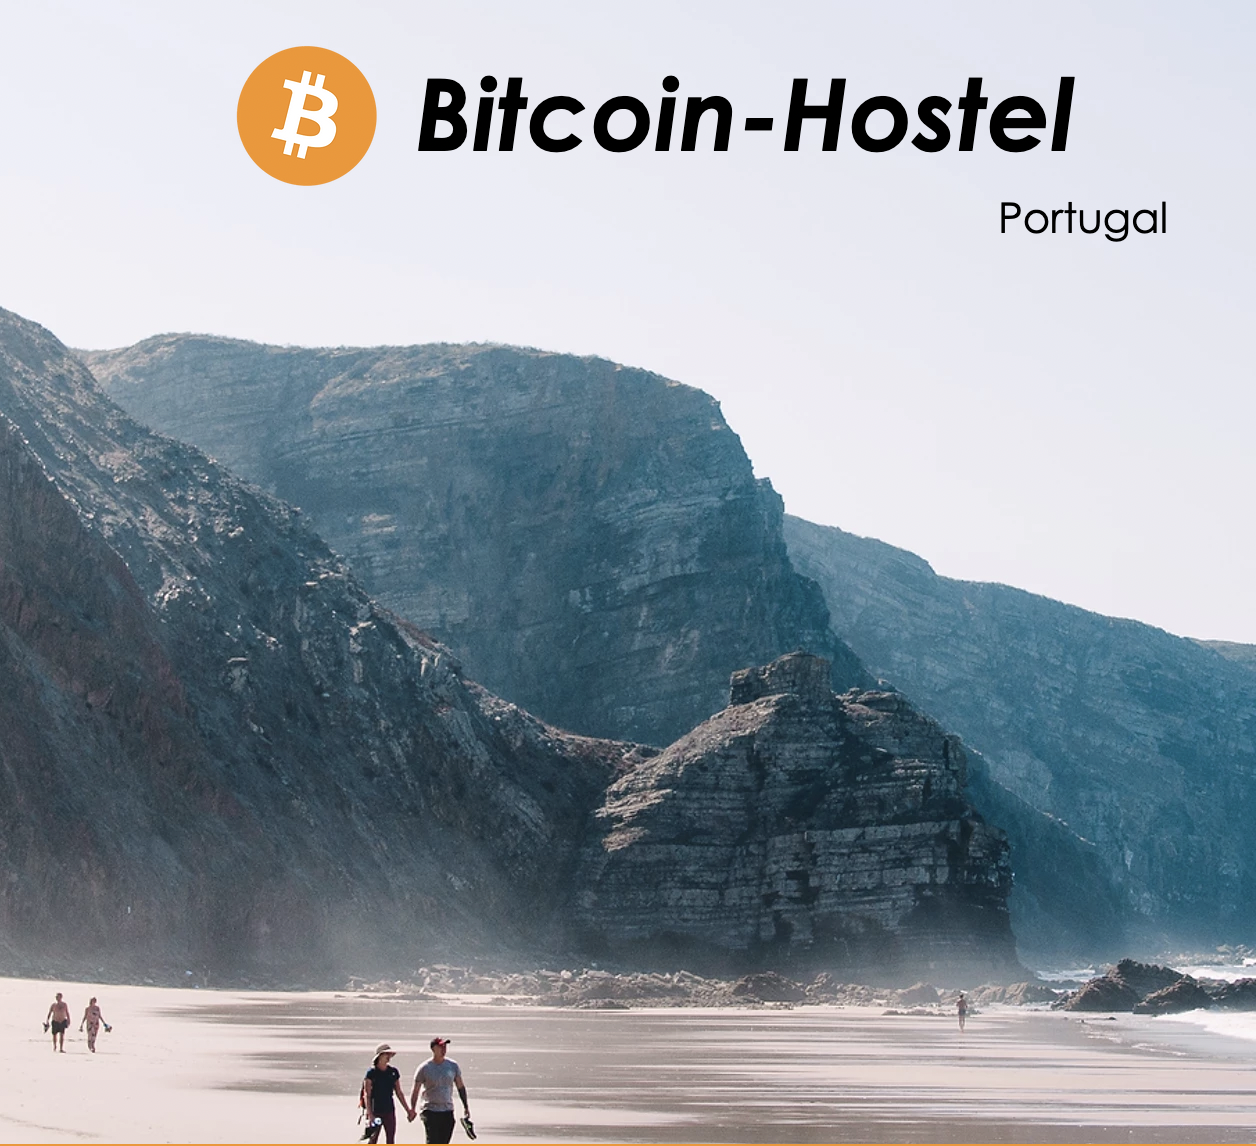 building businesses in the spirit of bitcoin the bitcoin hostel